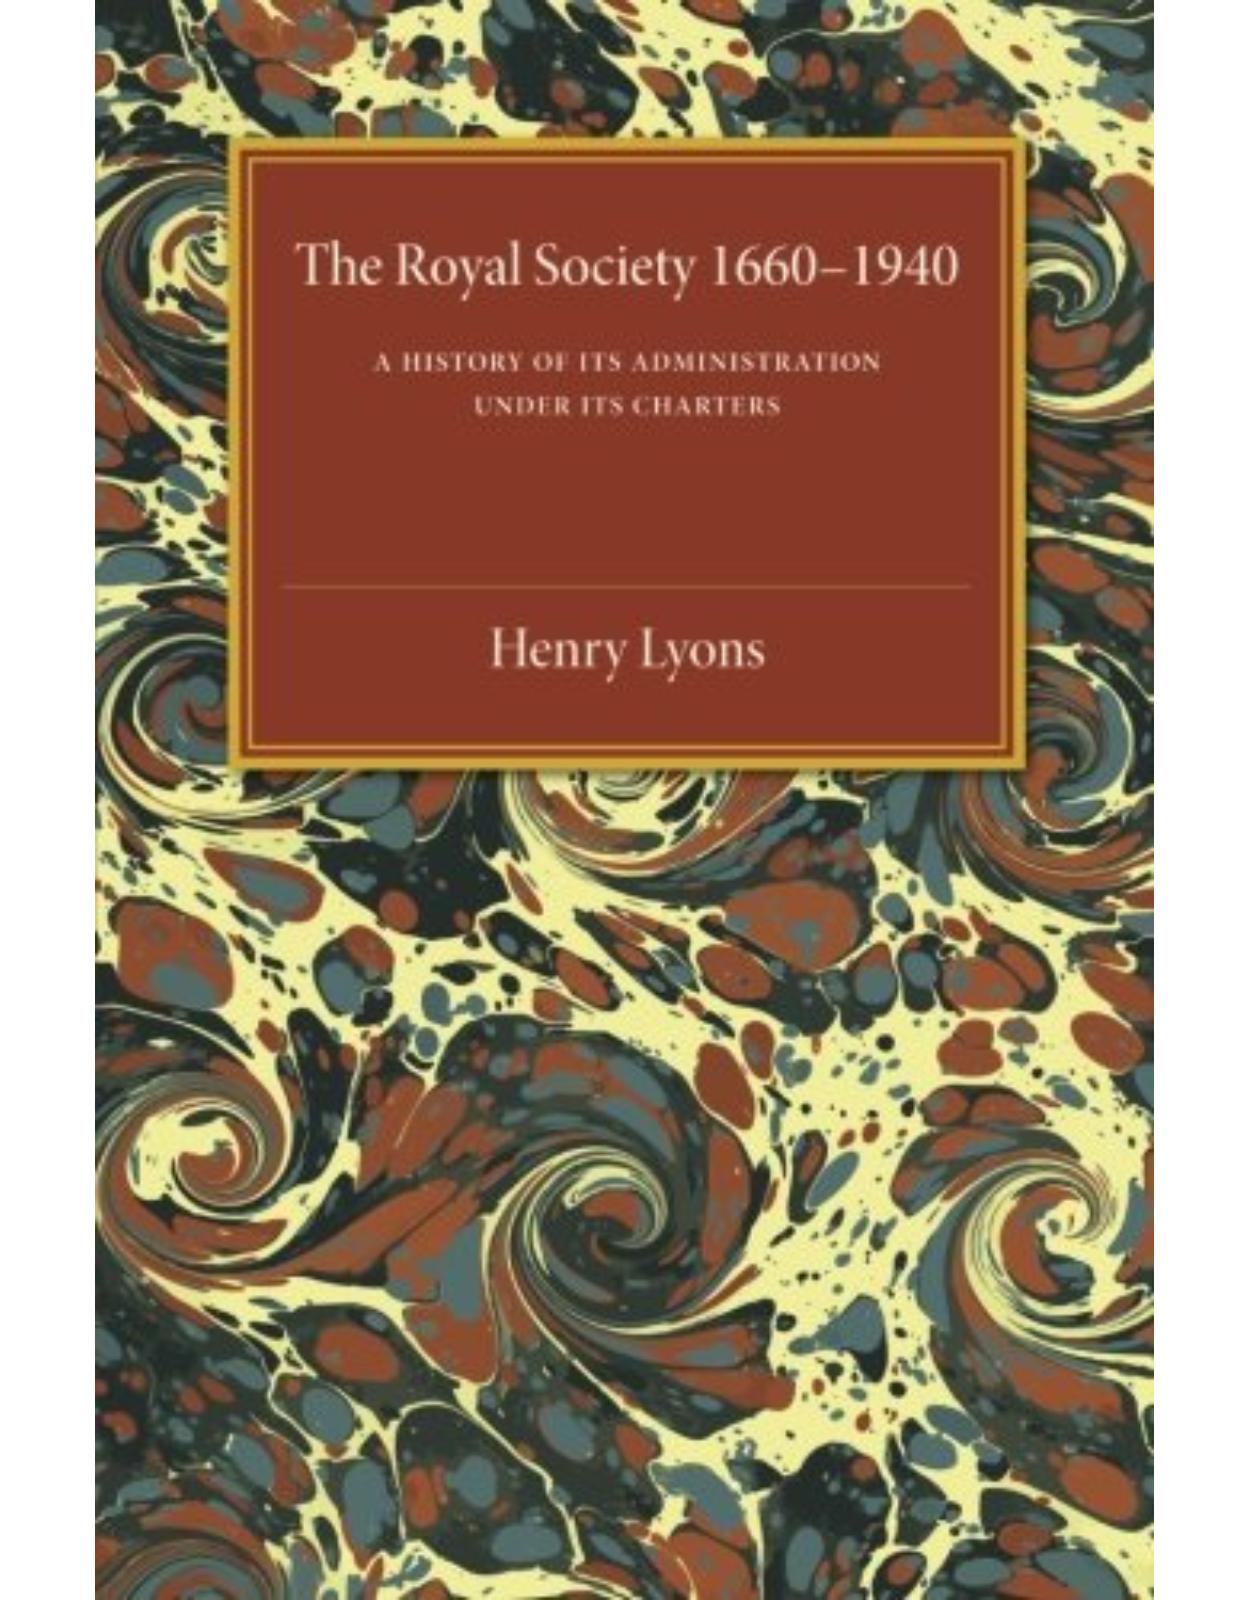 The Royal Society, 1660-1940: A History of its Administration under its Charters 